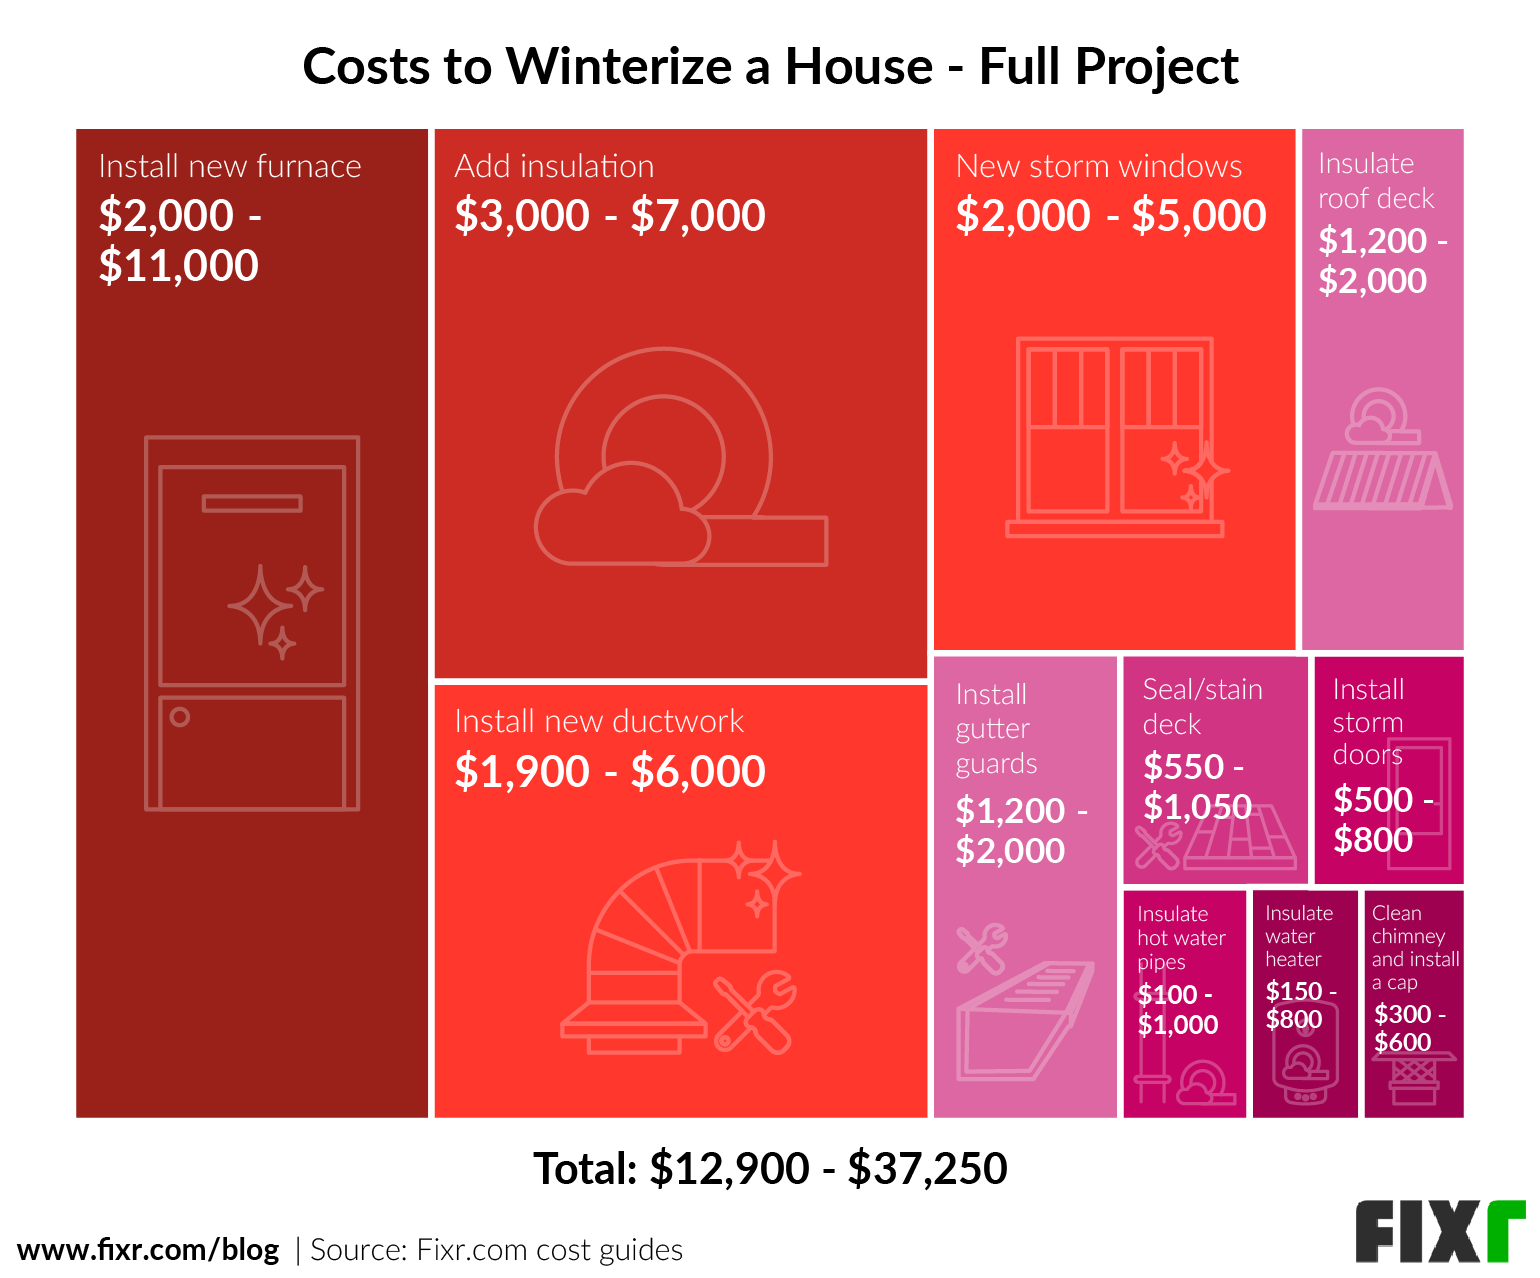 Cost to fully winterize a house